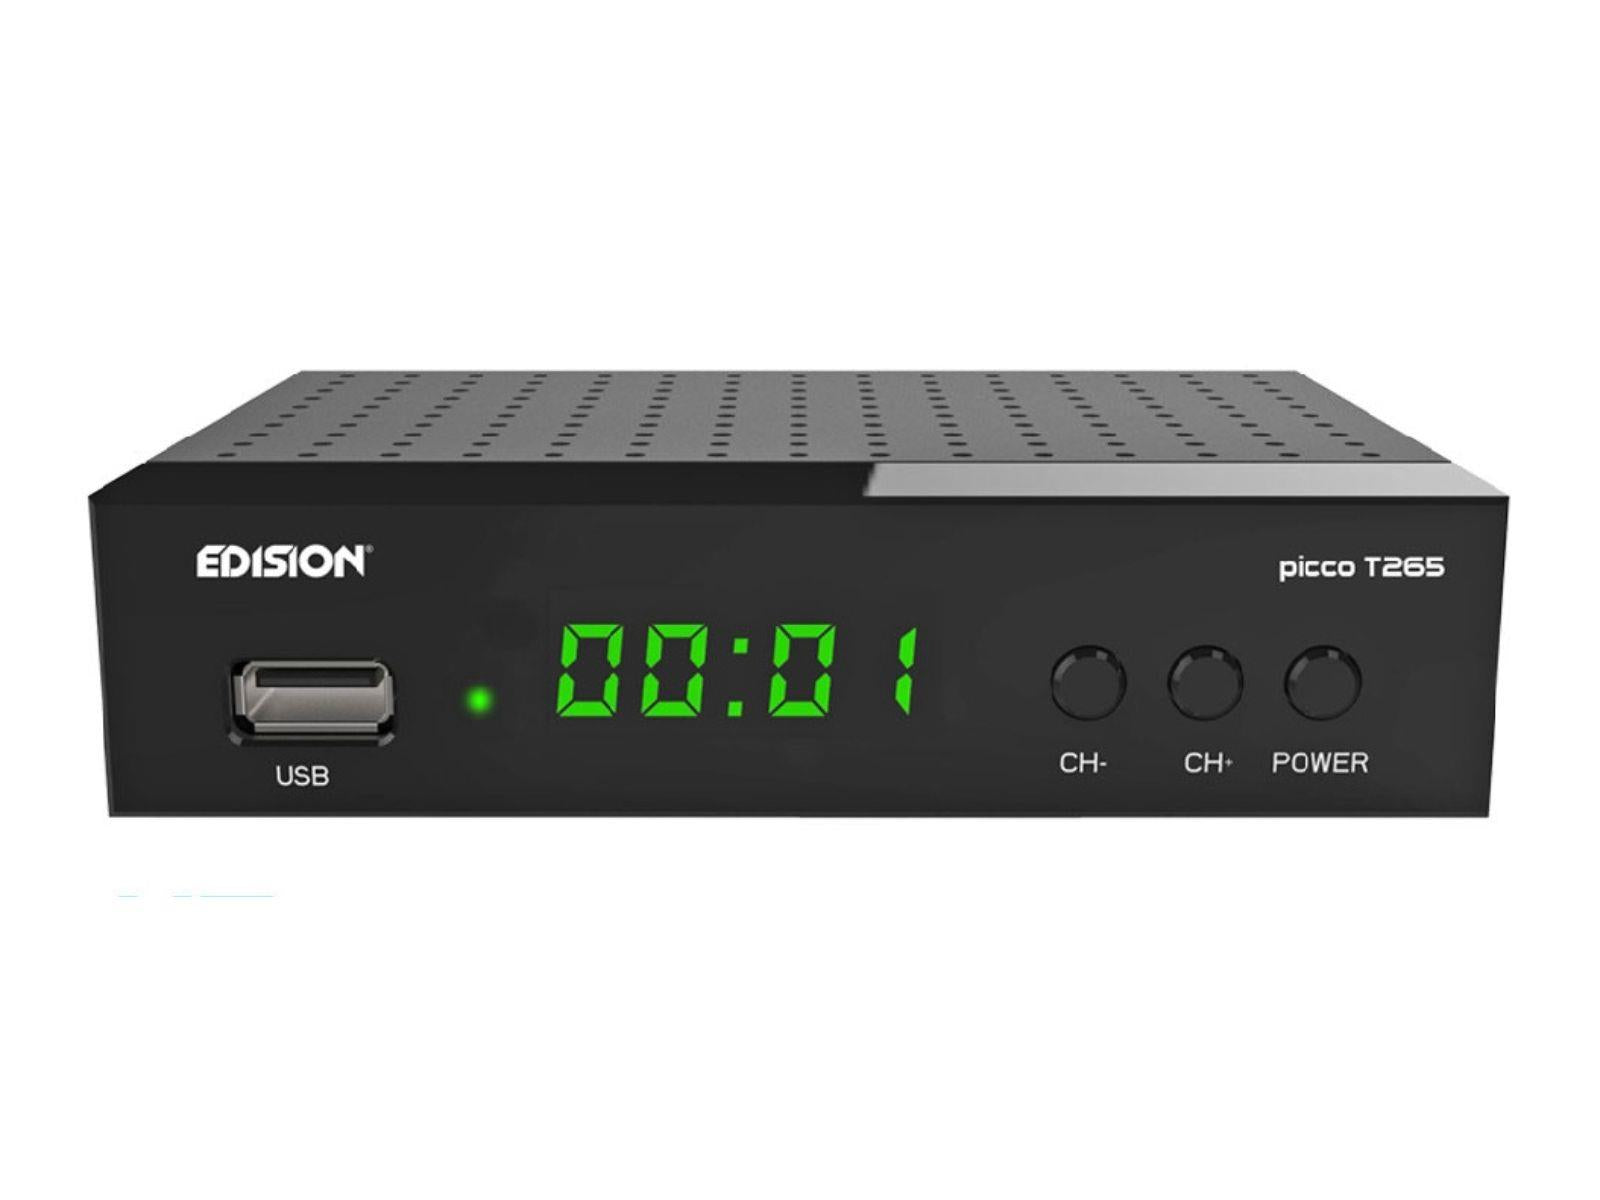 Edision™ Picco T2 DVB-T2 Receiver Front View